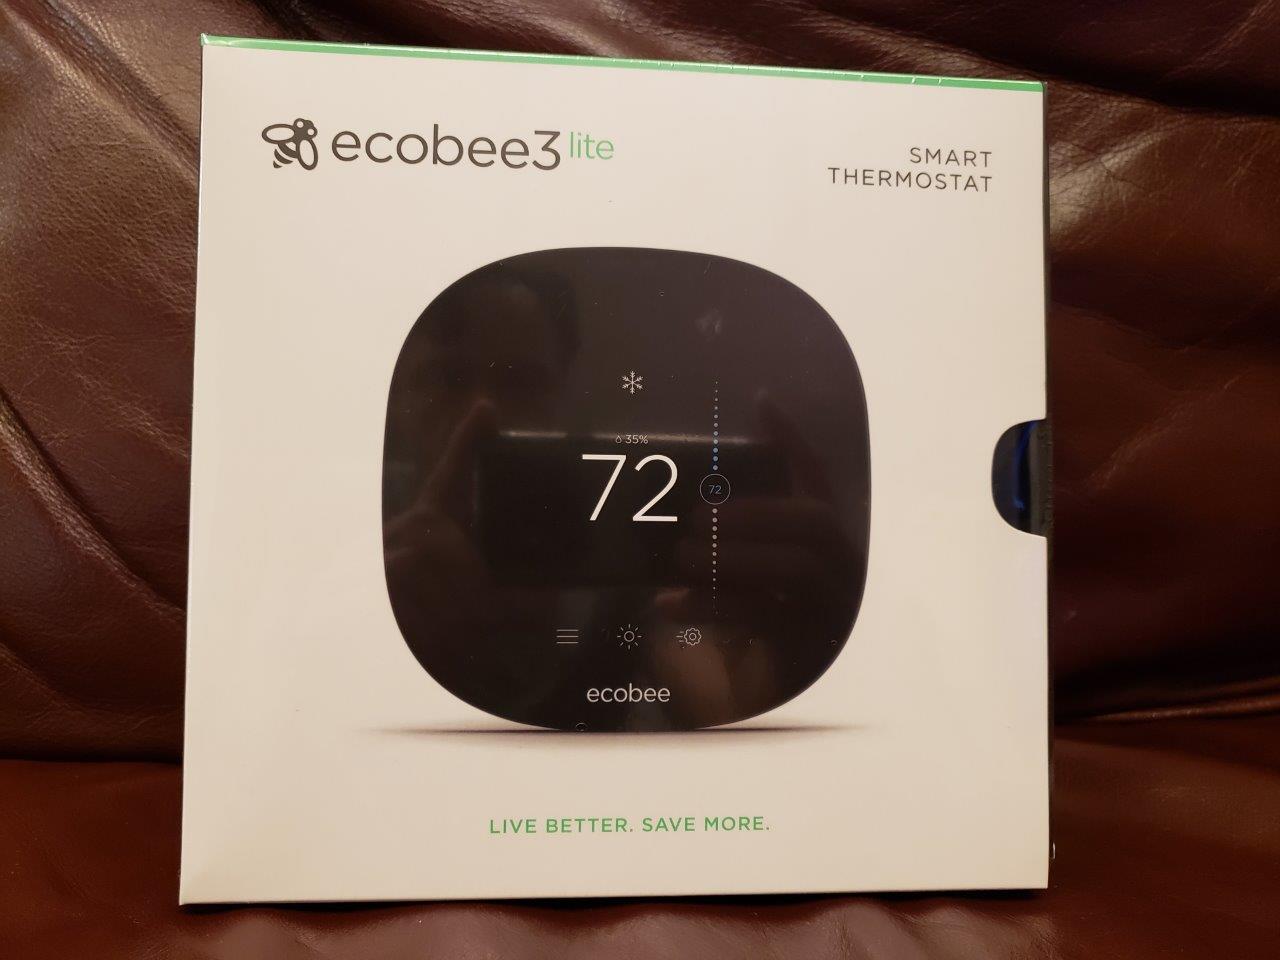 ecobee3 Lite Wi-Fi Thermostat Model EB-STATE3LT-02 WIFI Smart Home, New Factory Sealed